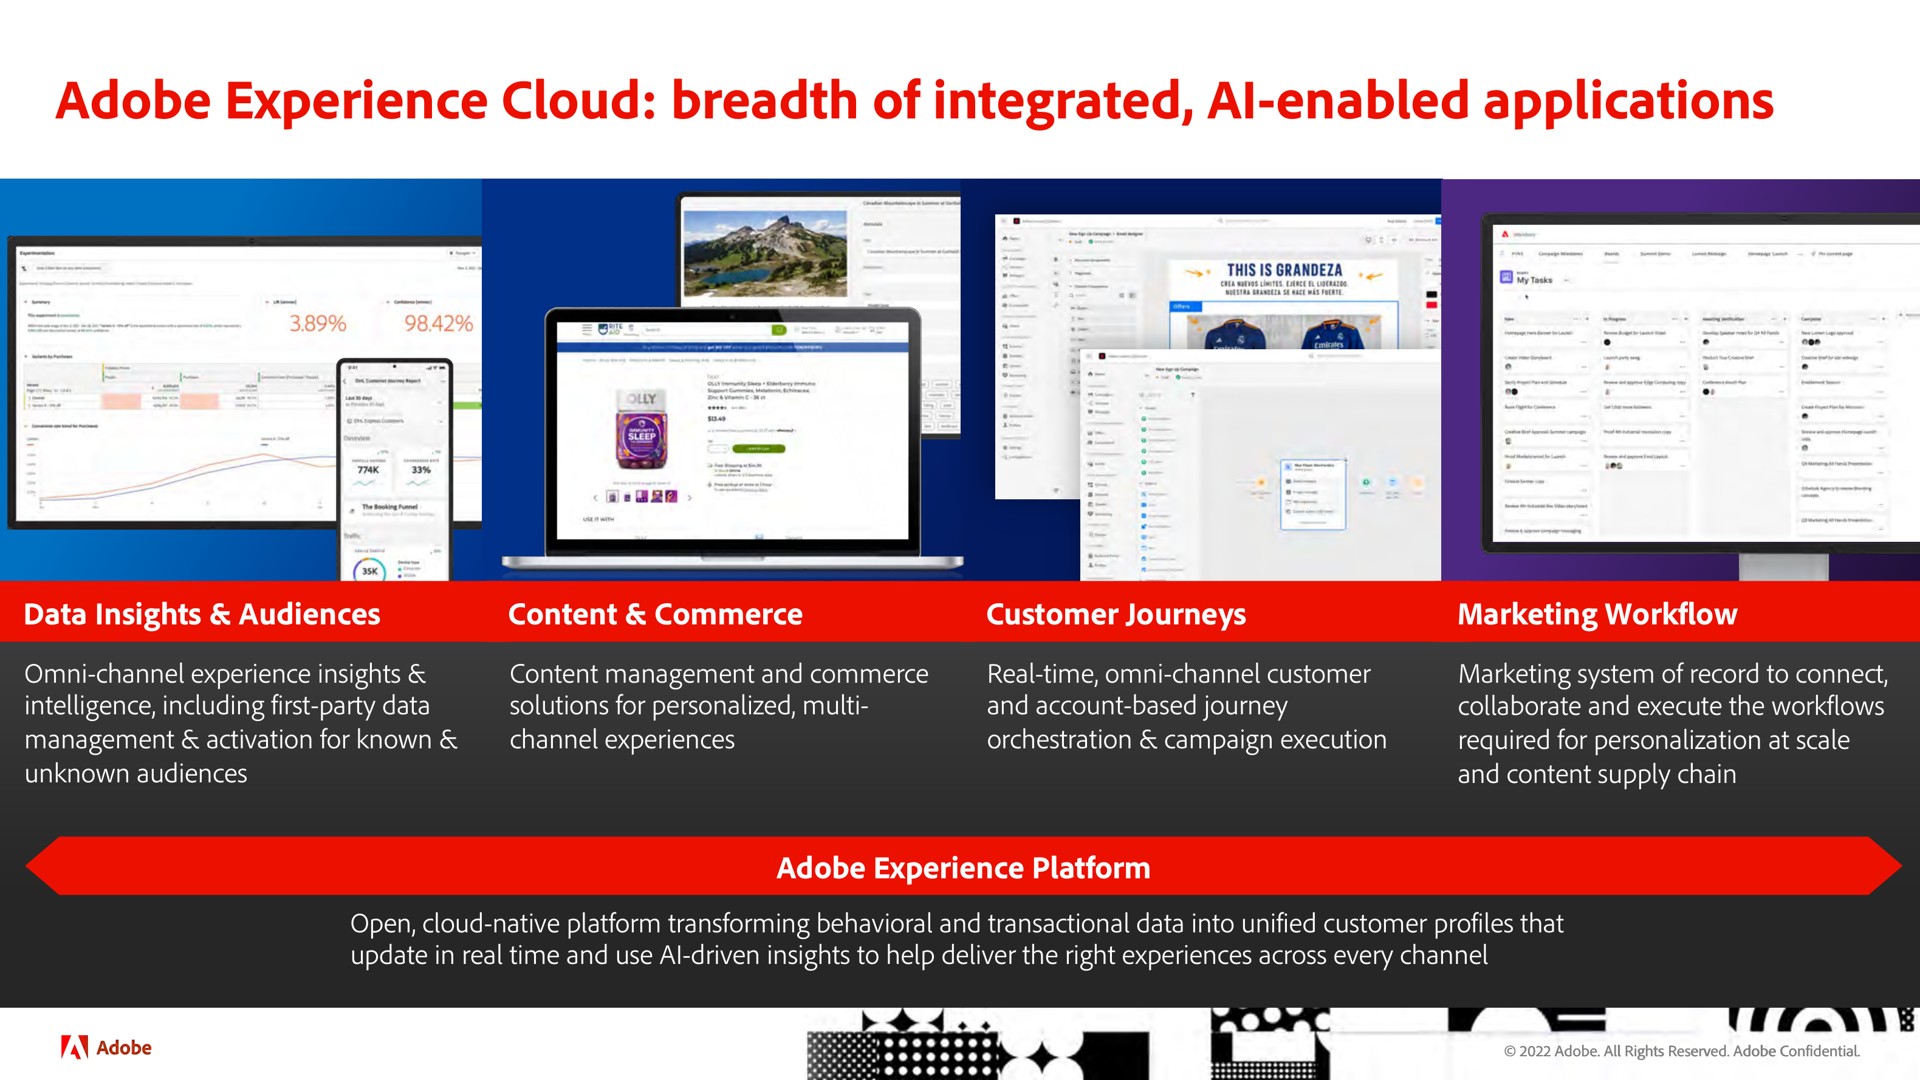 adobe experience cloud breadth of integrated enabled applications enabled | Adobe